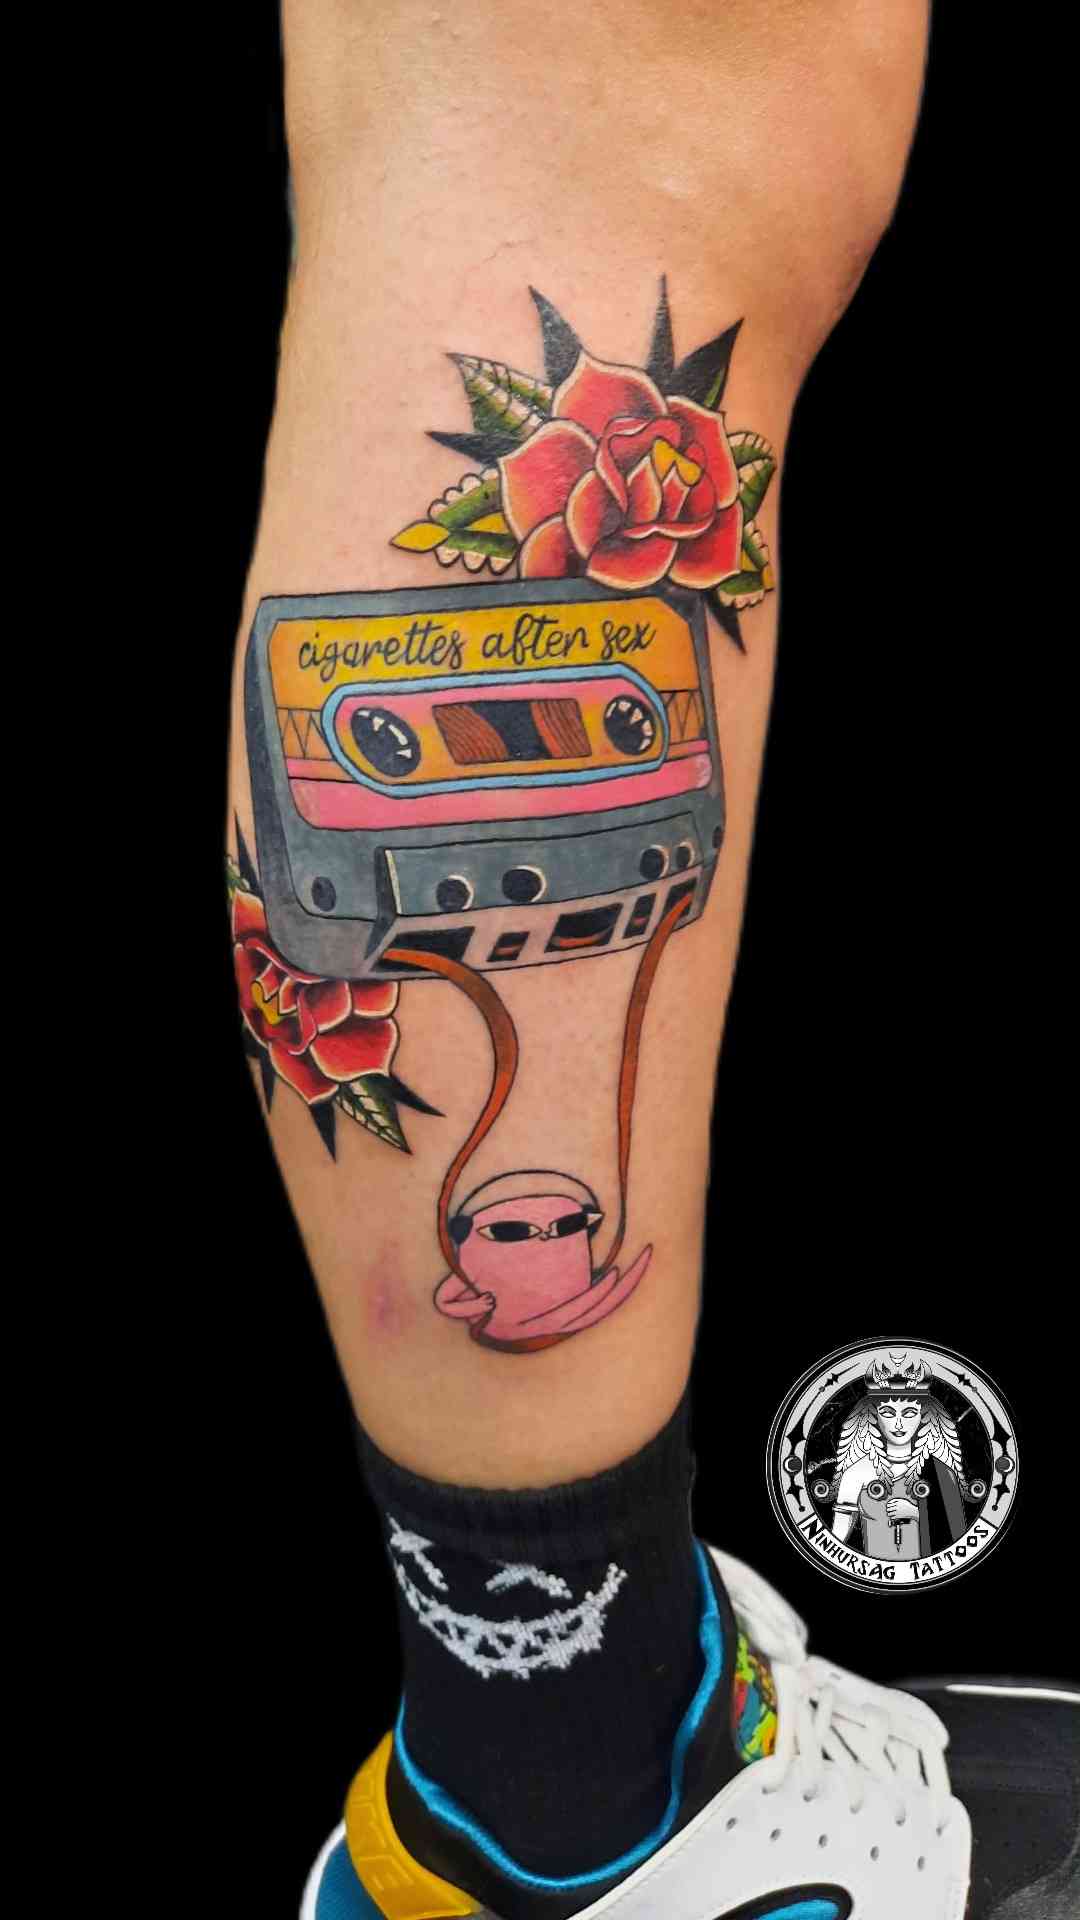 60+ Best Music Tattoos To Show Off Your Love For Good Tunes | Music tattoo  designs, Tattoos, Cassette tattoo